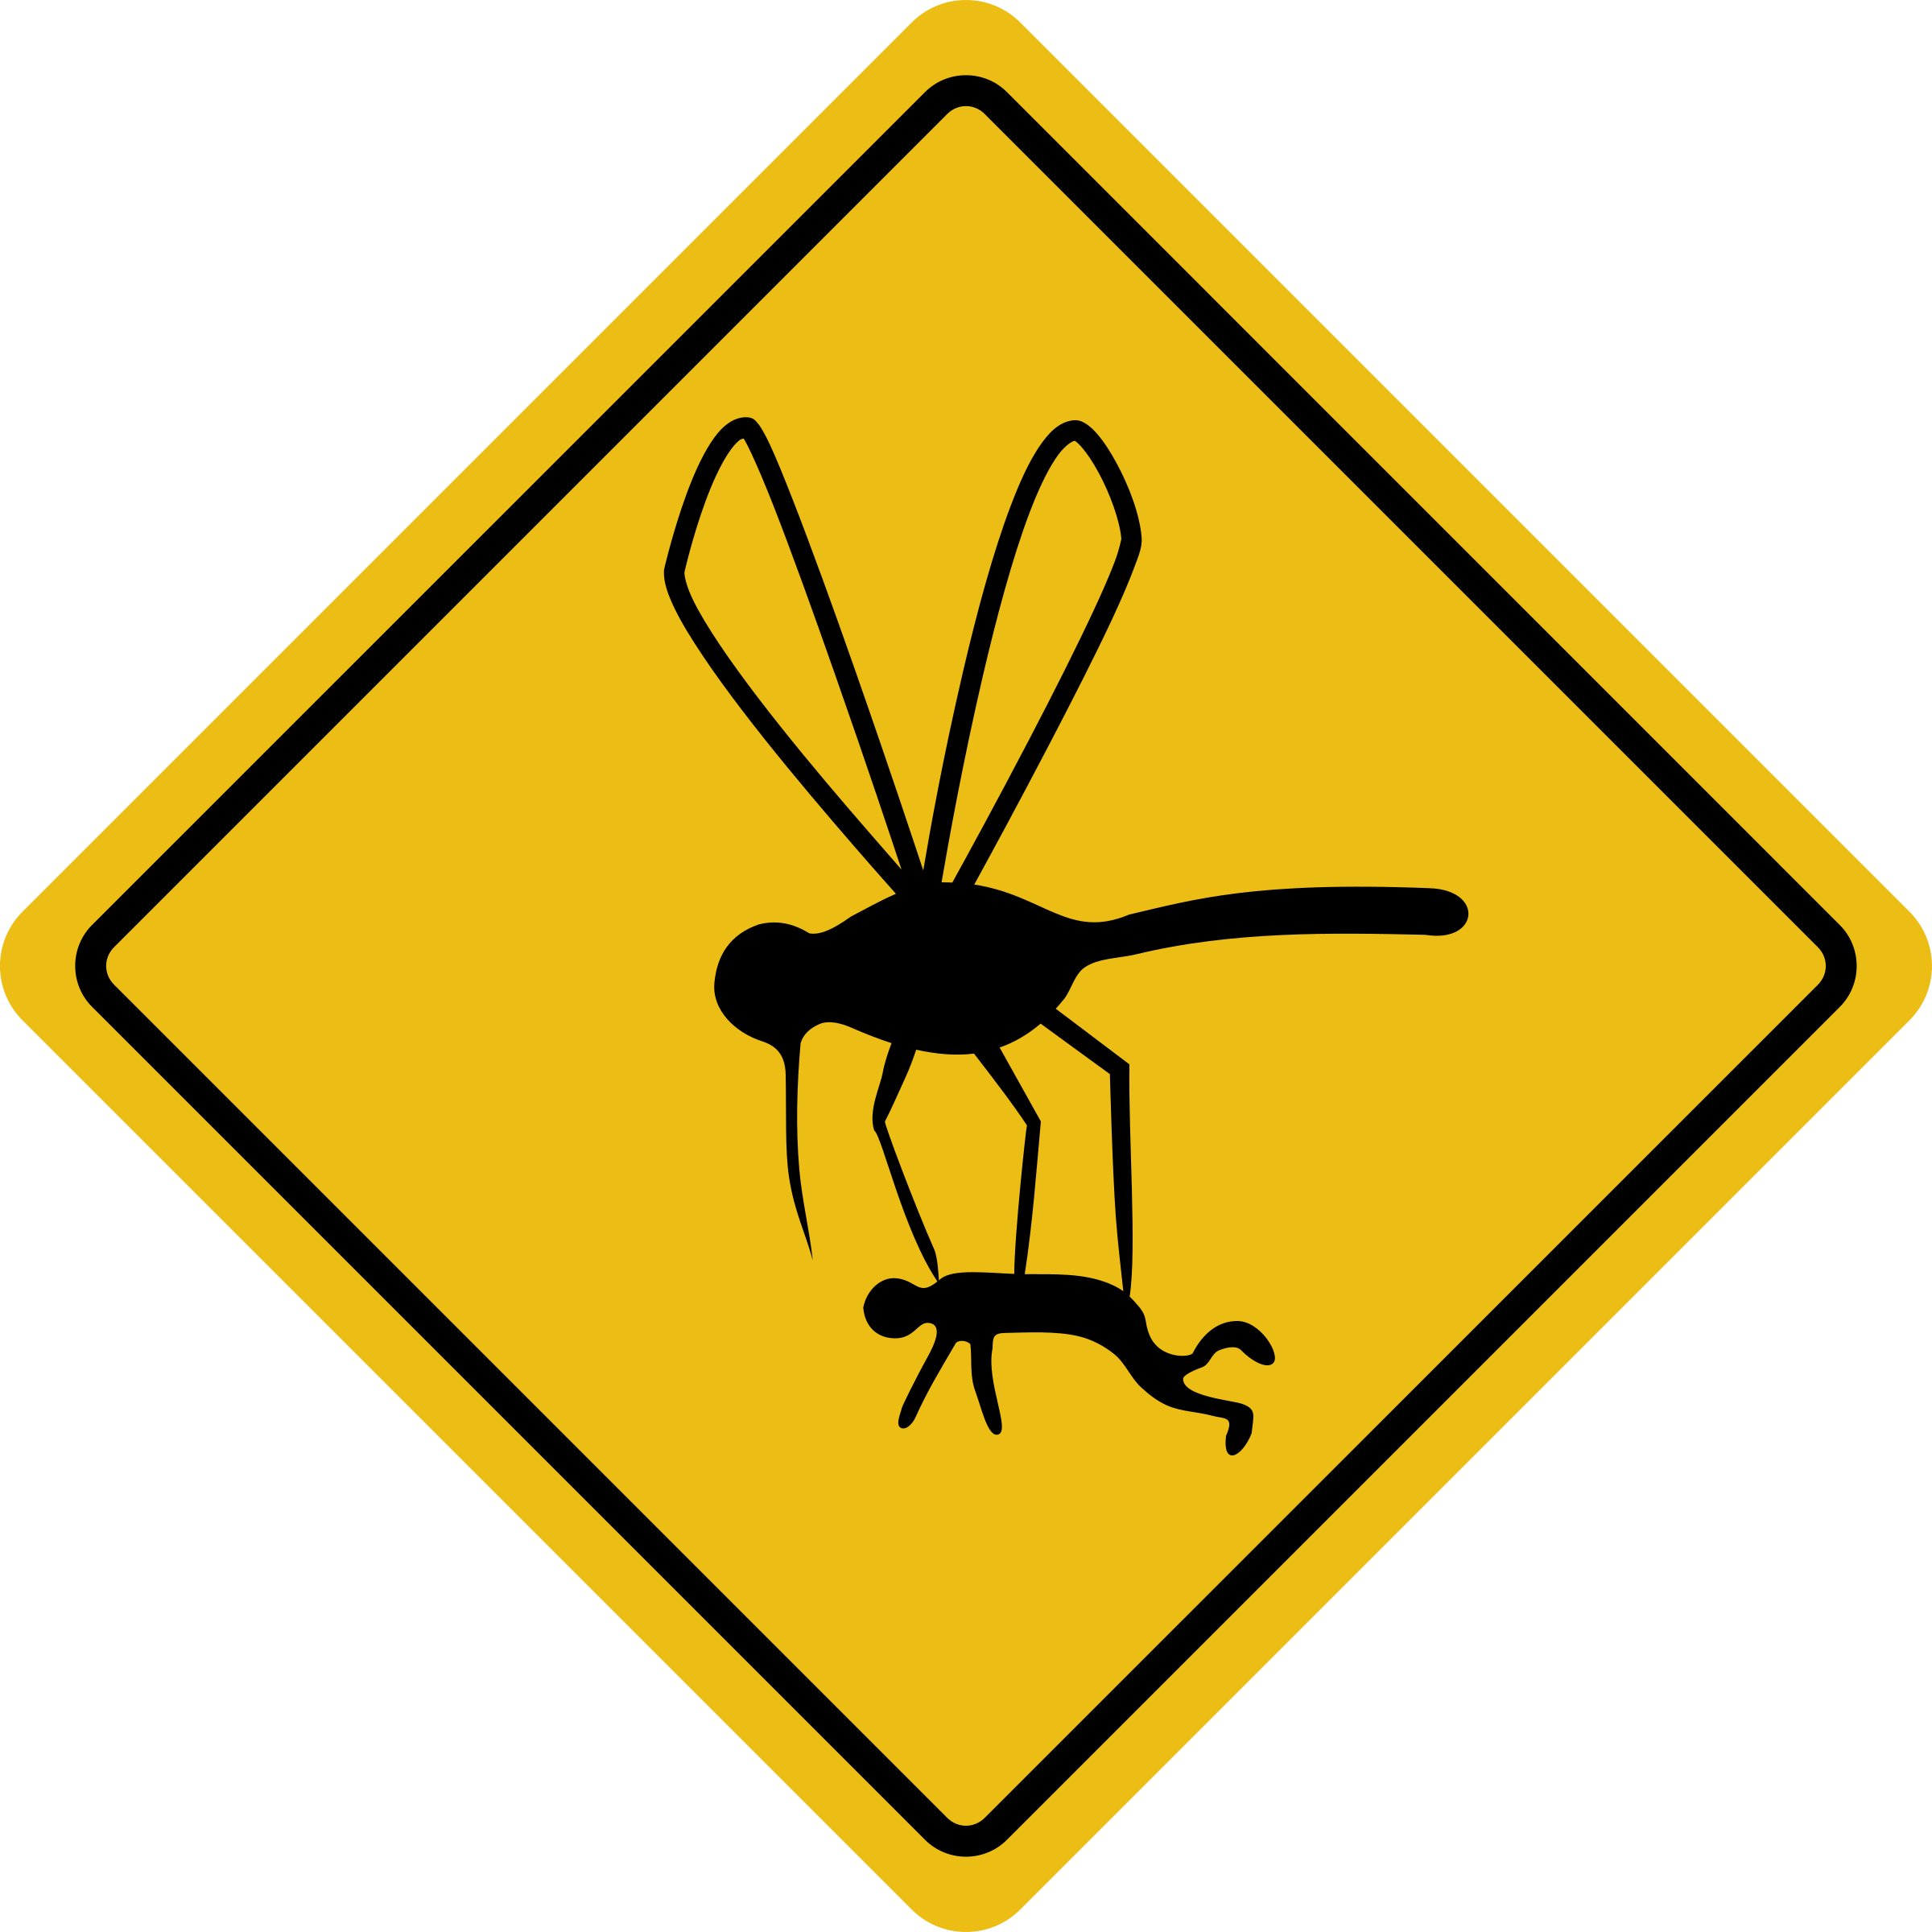 Mosquito clipart gnat. Human pencil and in